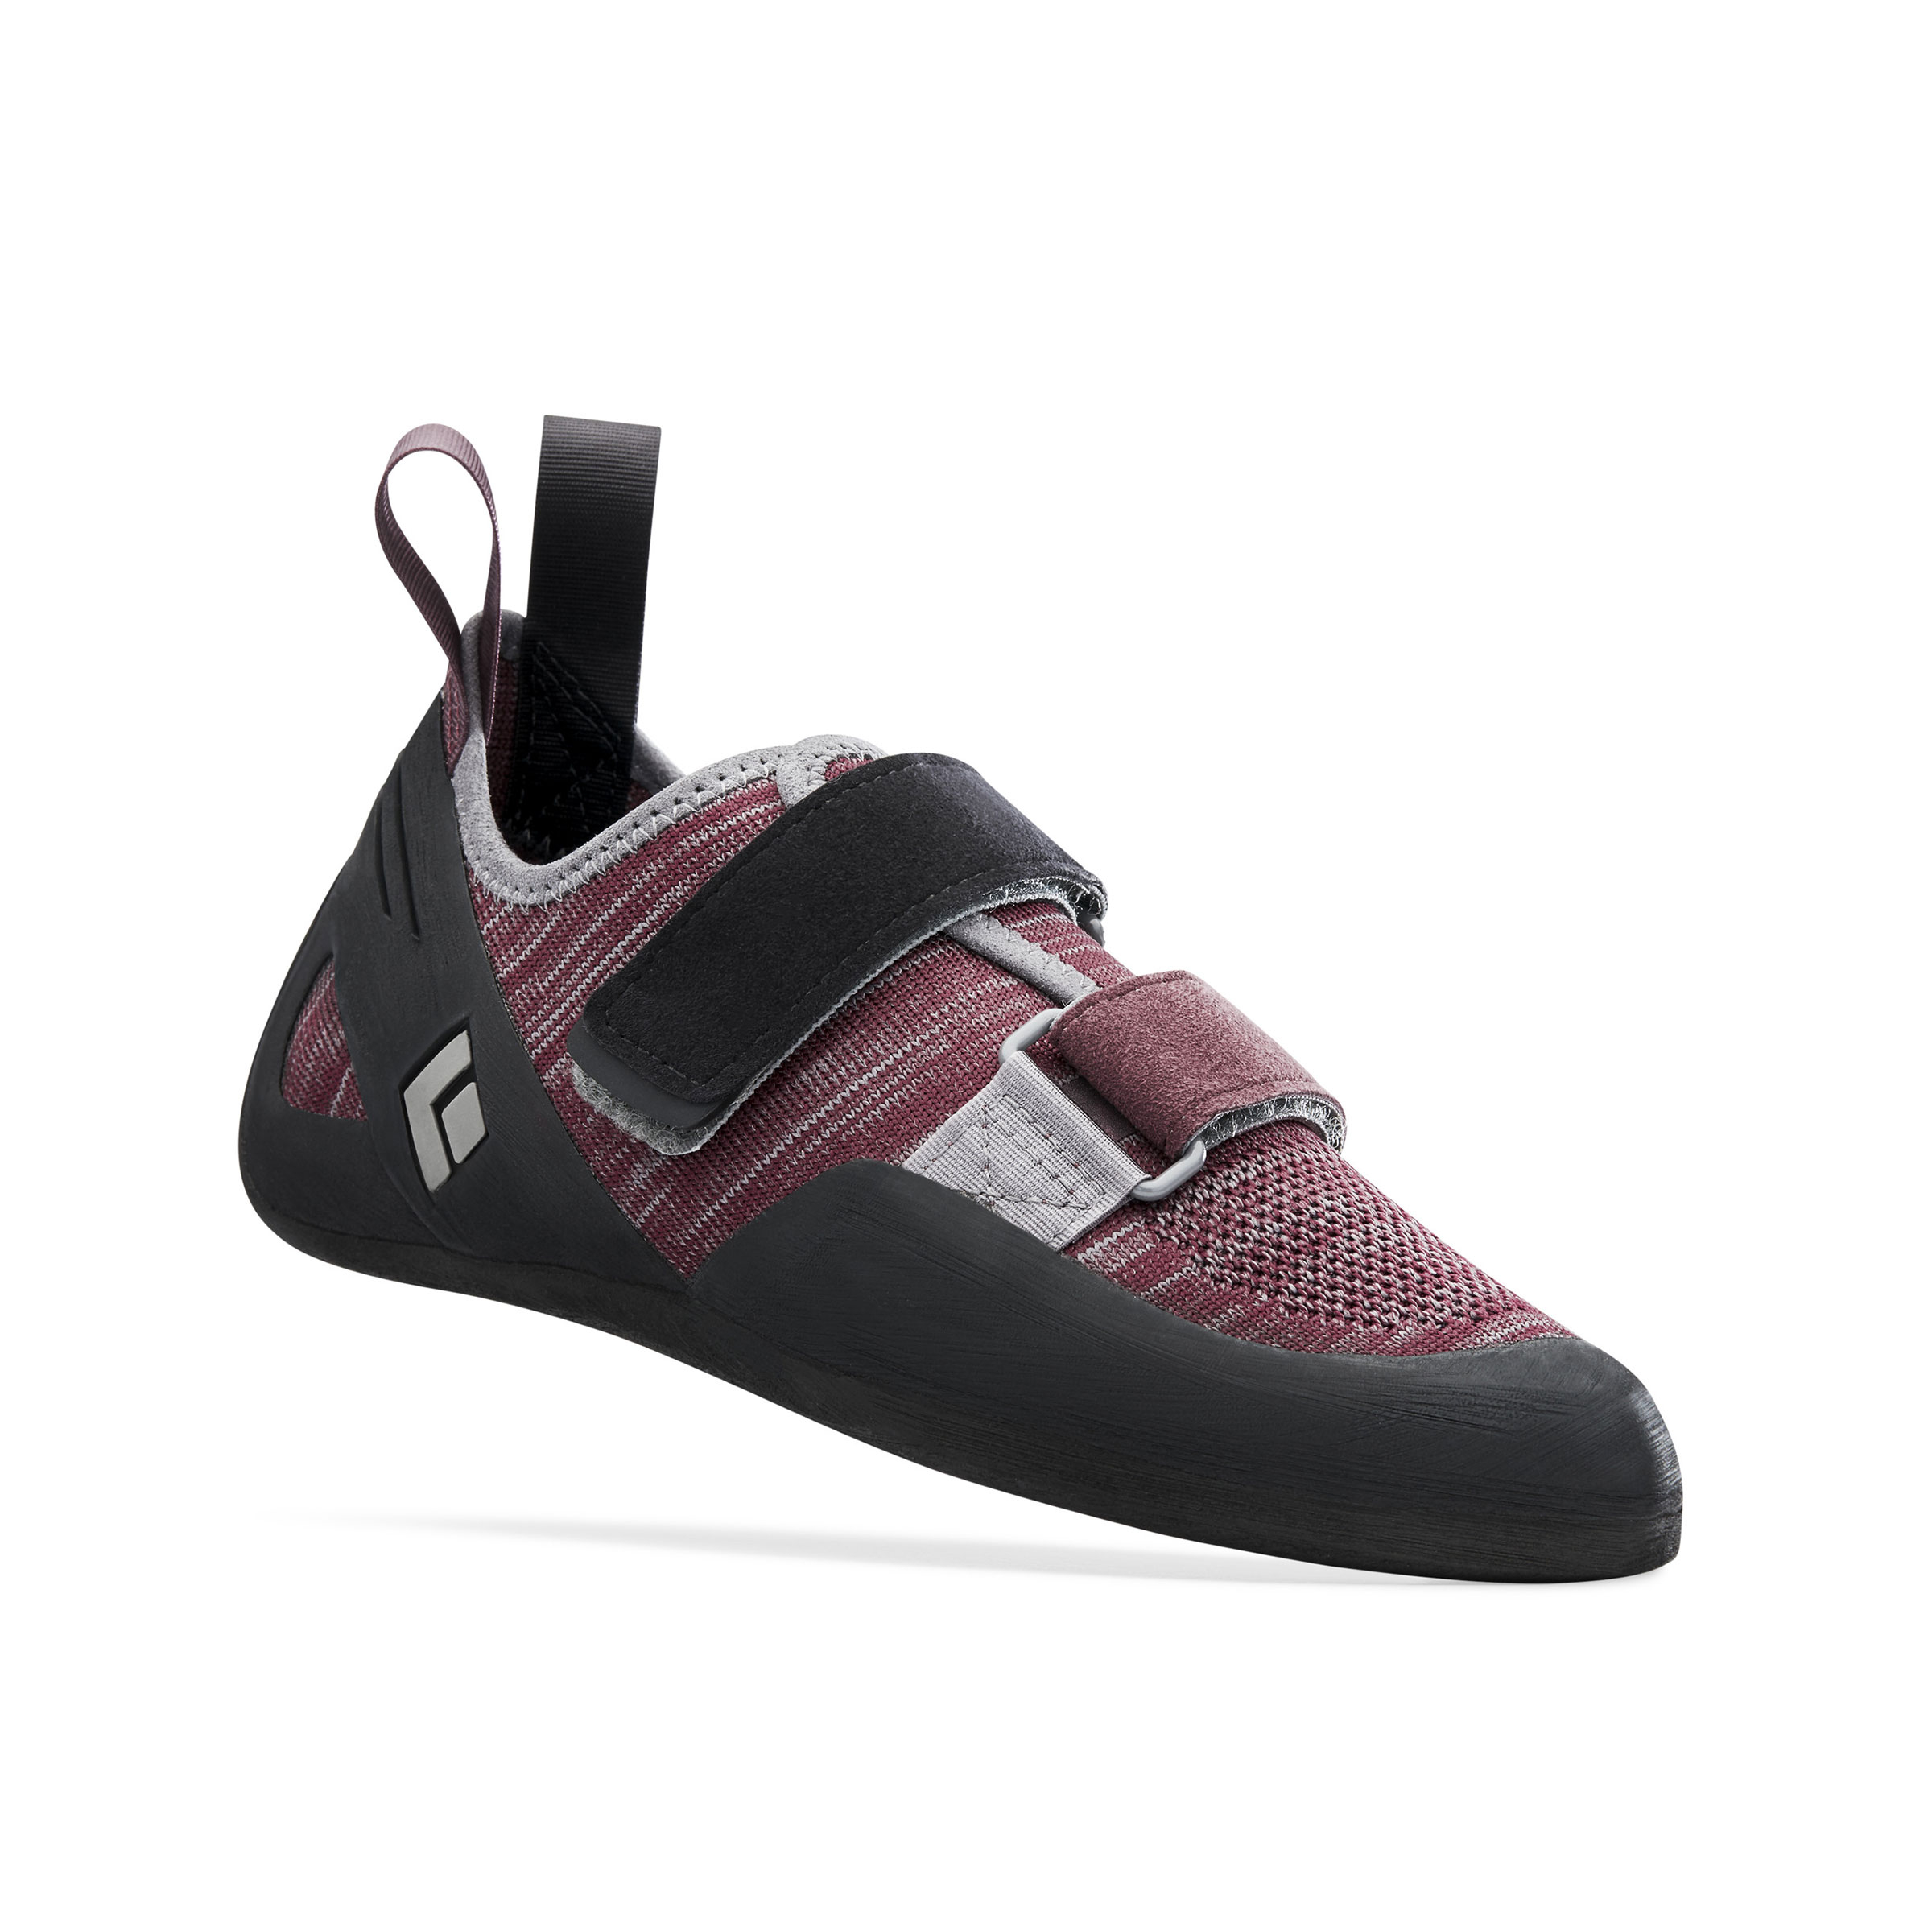 Chaussons d'escalade Momentum Ws